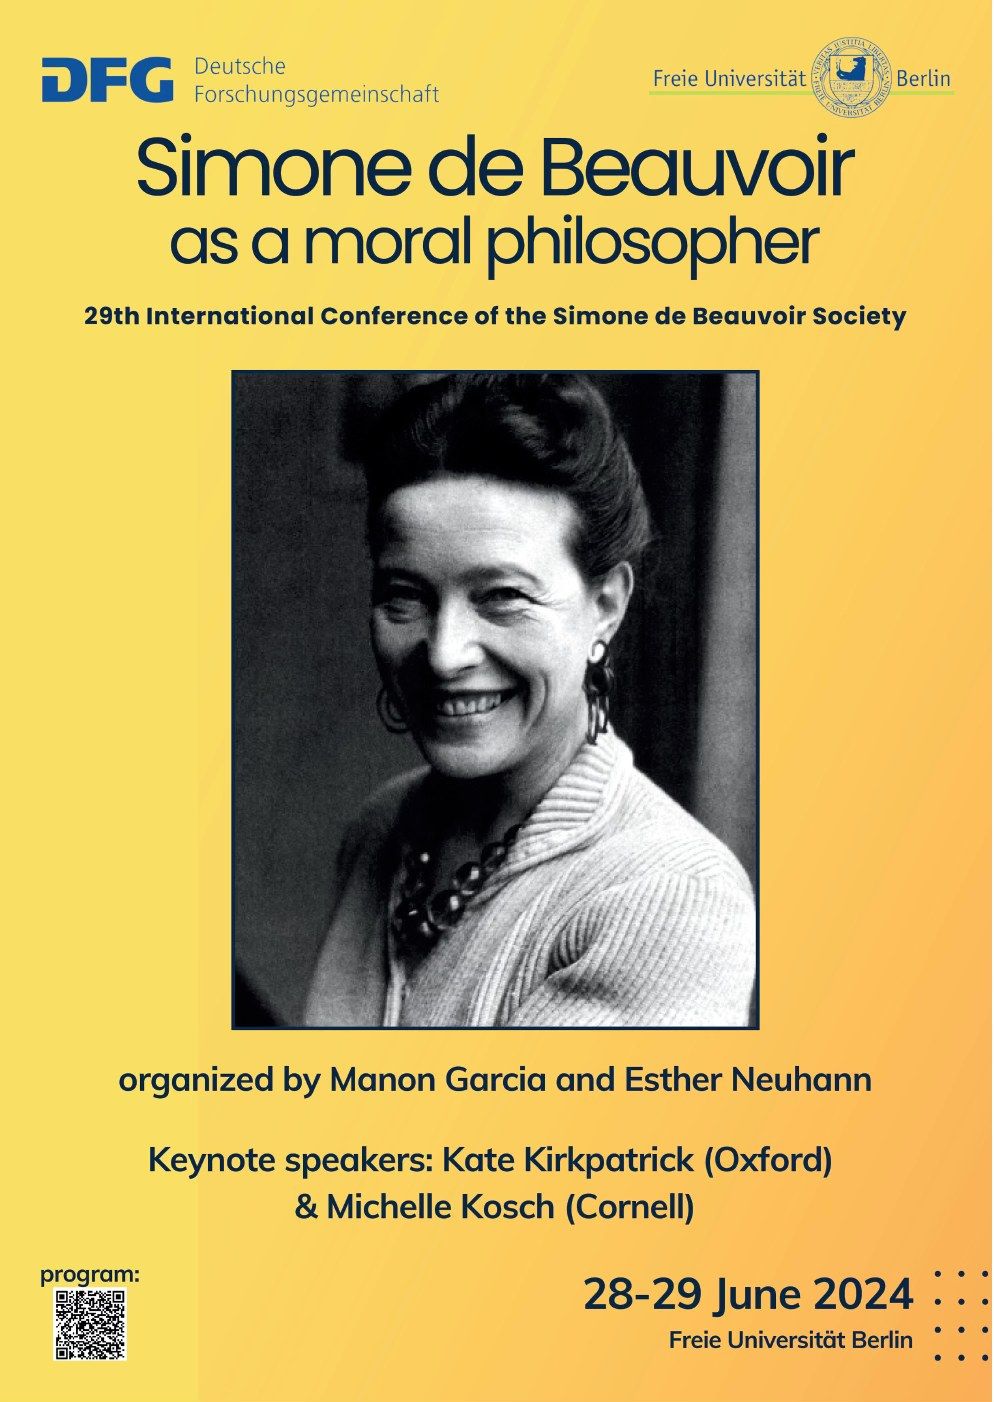 Simone de Beauvoir as a Moral Philosopher (29th International Conference of the SdB Society)